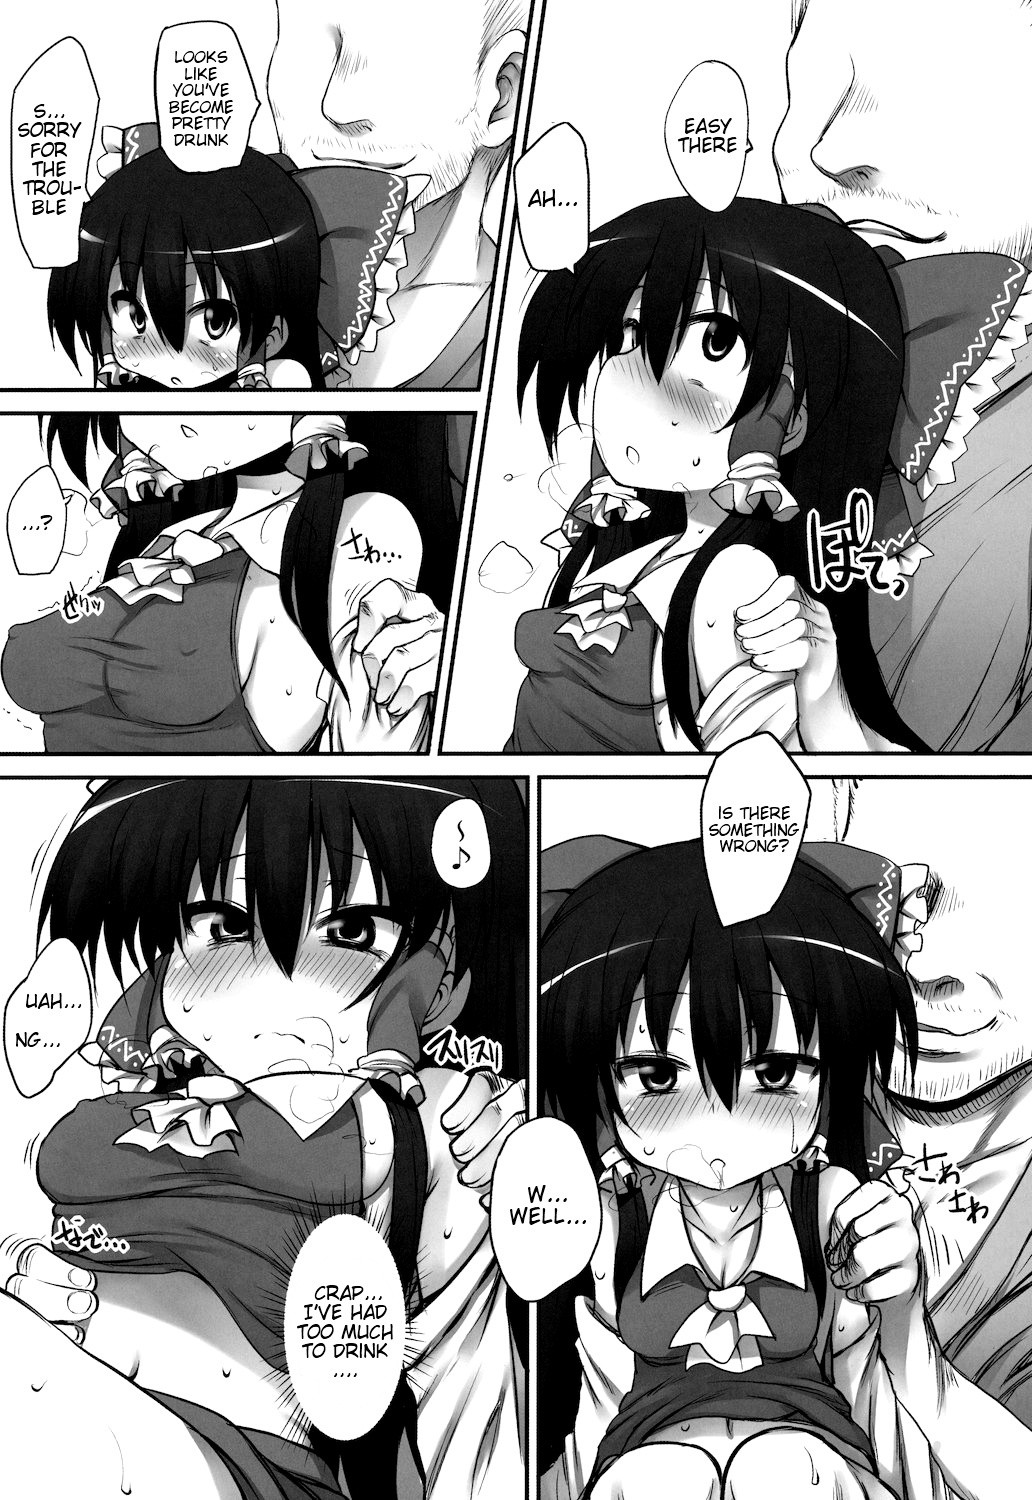 THE PARTY of Gensoukyou -Part I hentai manga picture 6